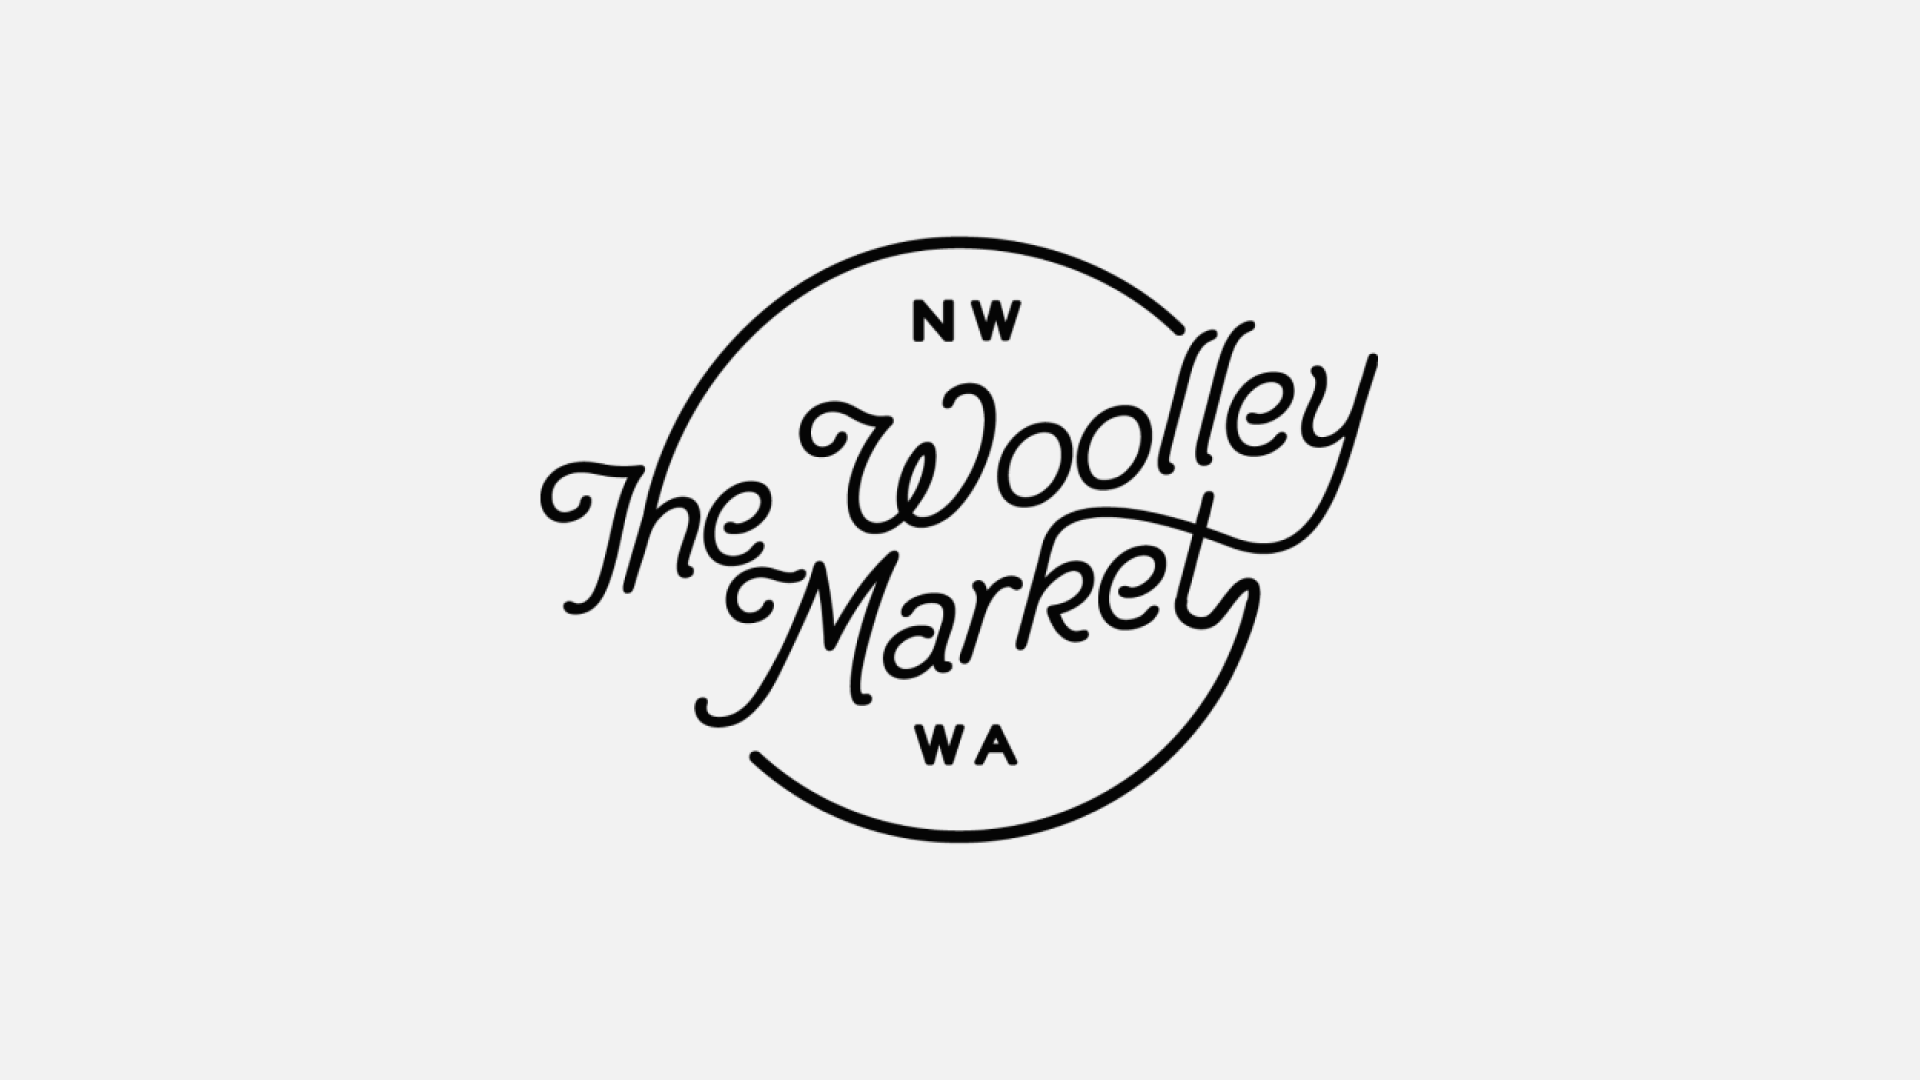 Circular script arrangement of the words The Woolley Market with initials signifying nw wa for Northwest Washington